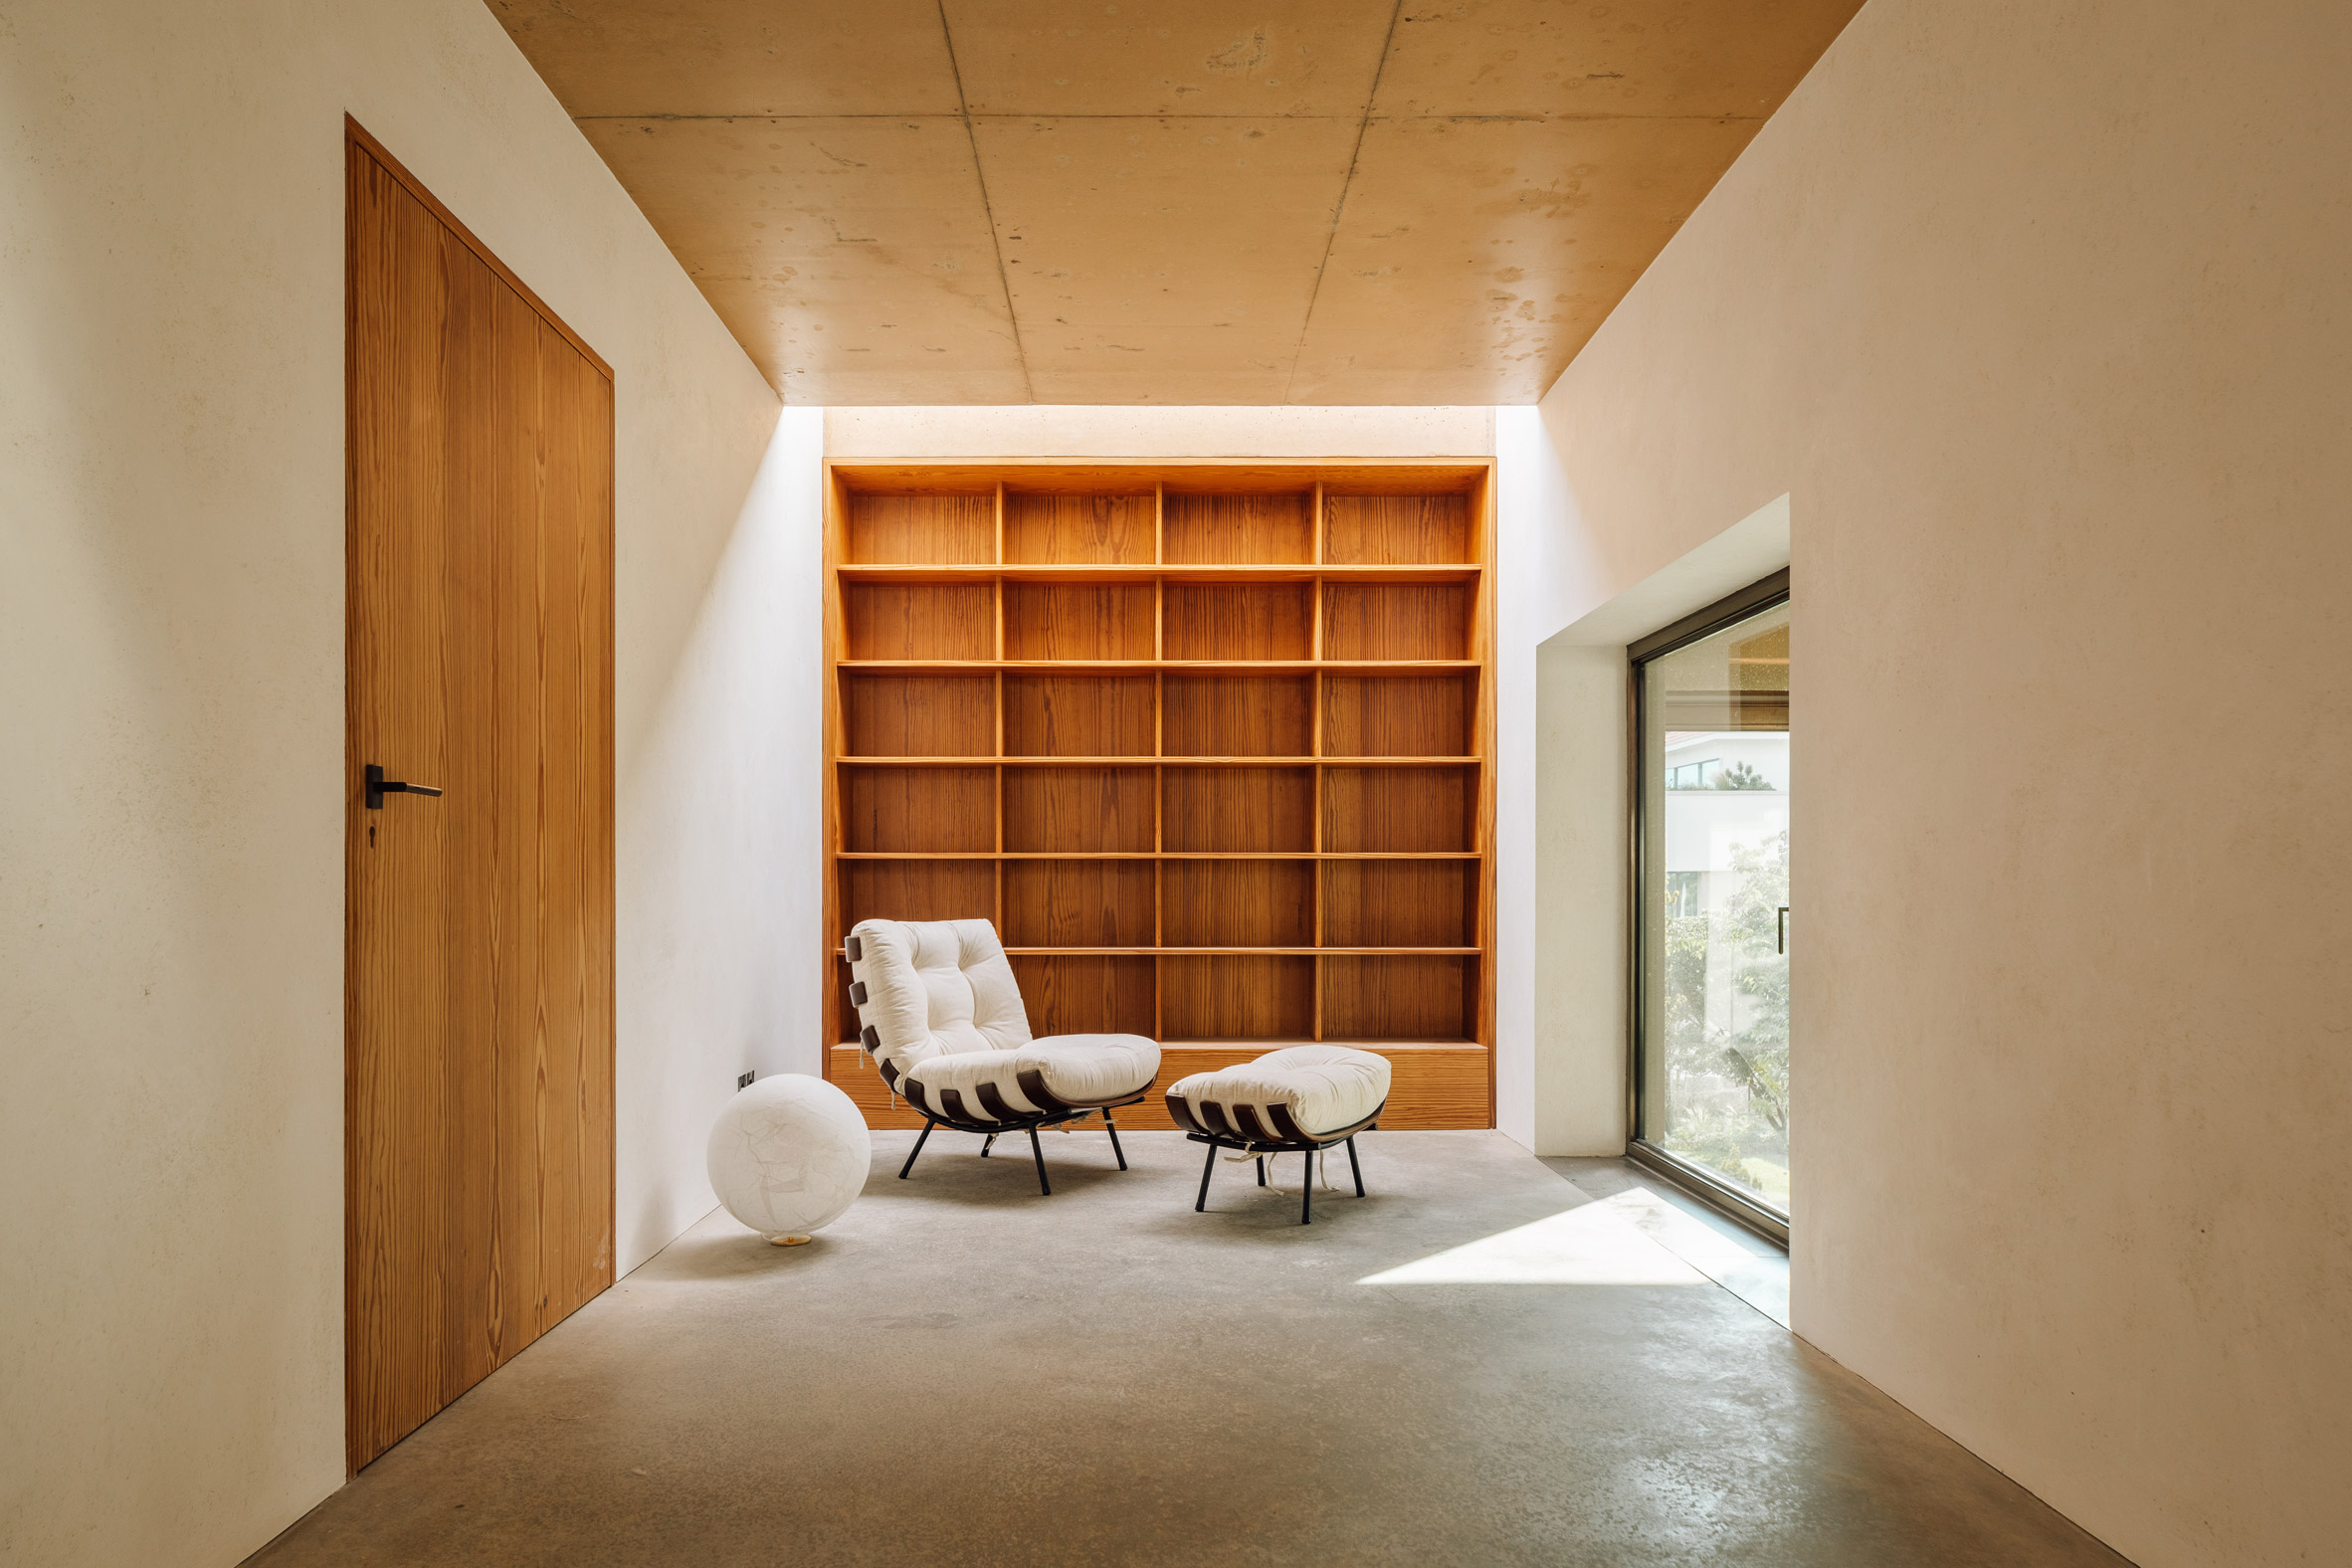 Interior view of a study space at Casa 2 Porto with built-in wooden shelf and white lounge chair